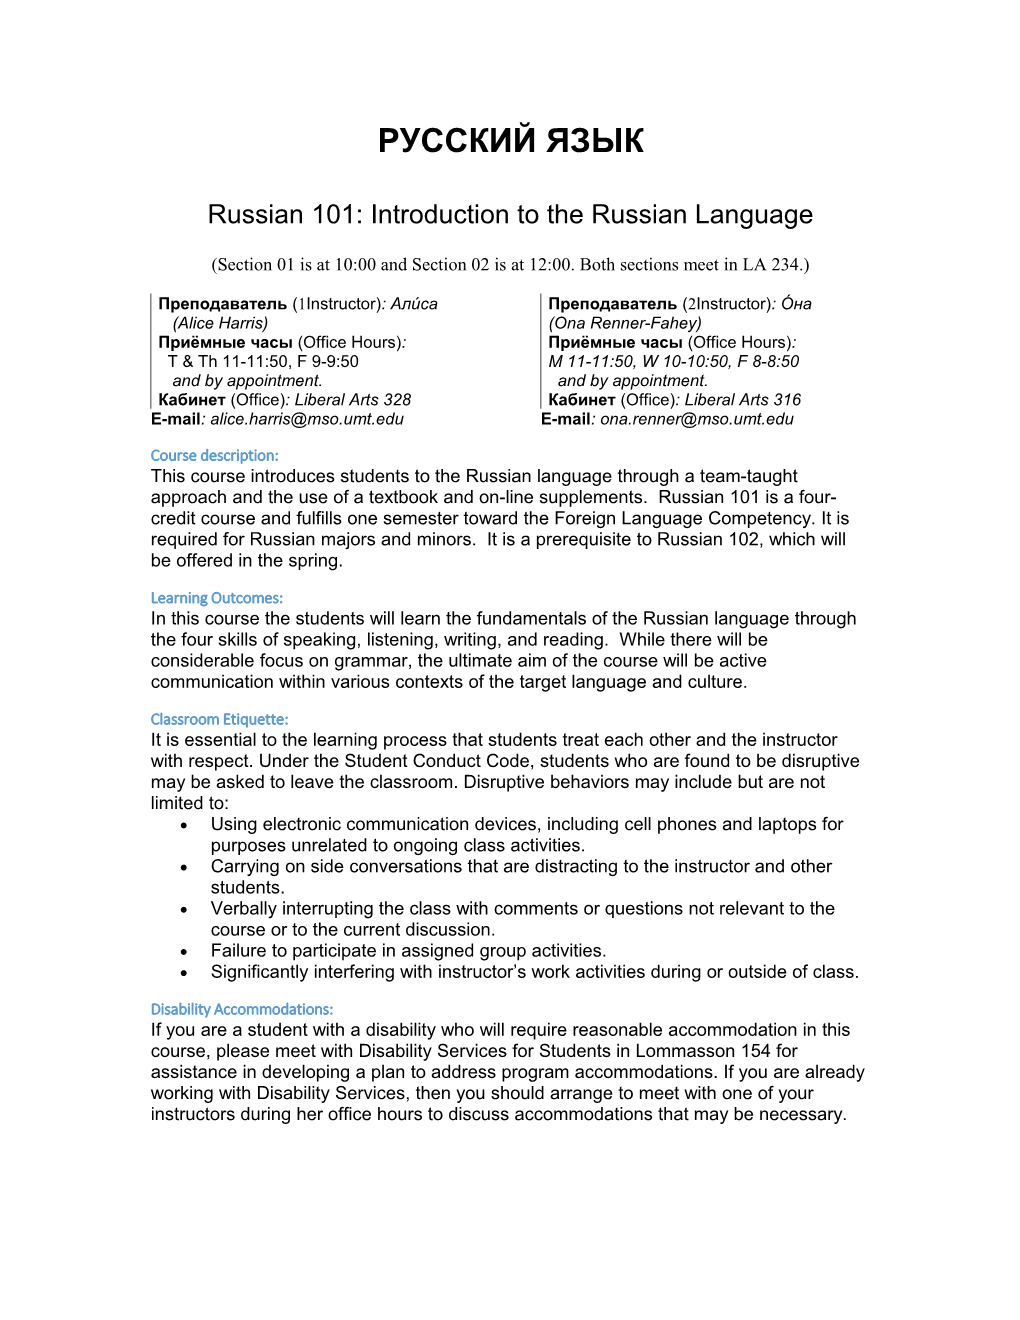 Russian 101: Introduction to the Russian Language